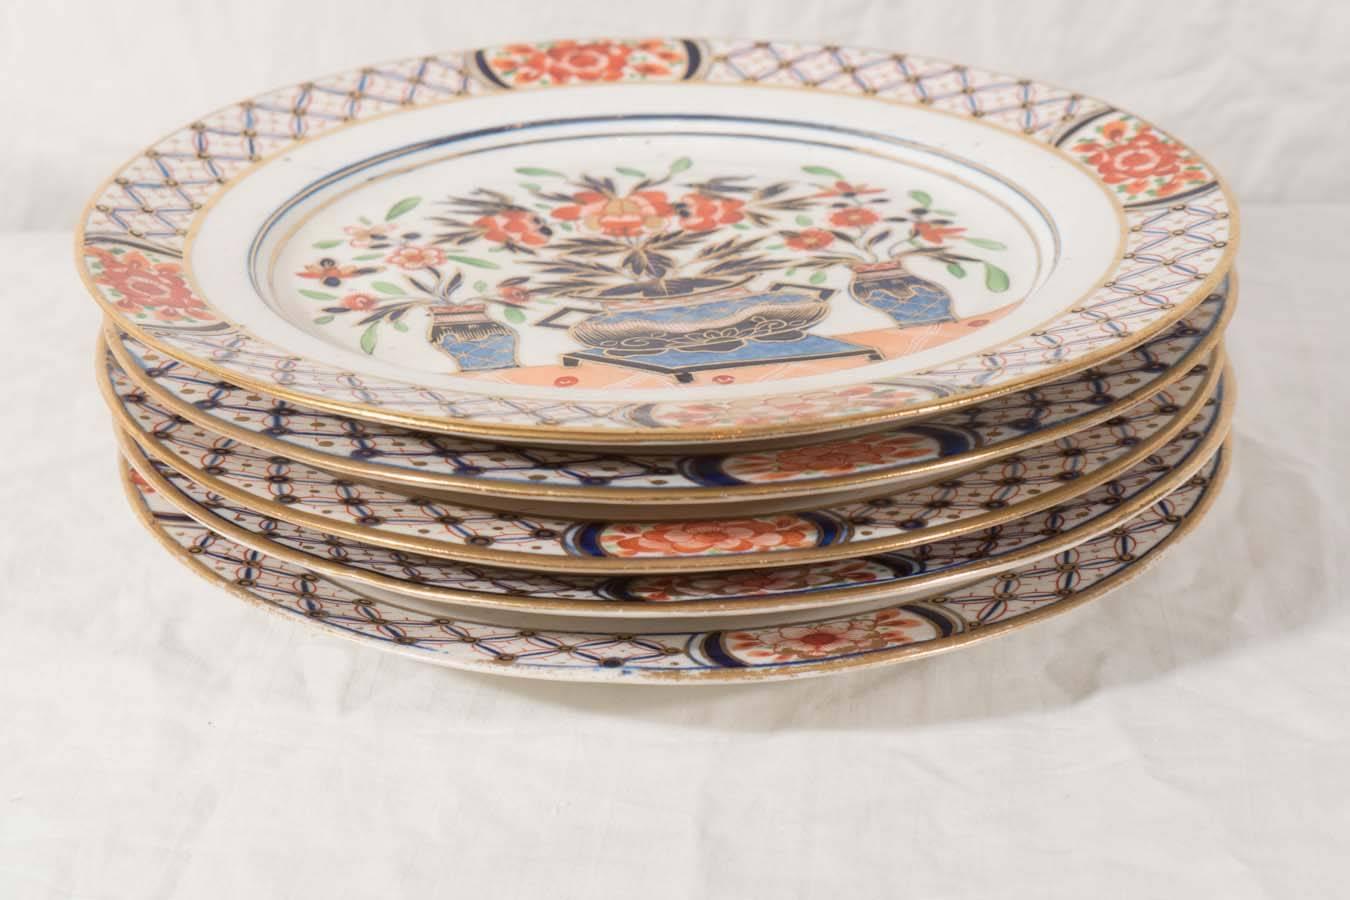 Set of 19th Century English Dishes in Imari Style with Cobalt Blue and Orange 2